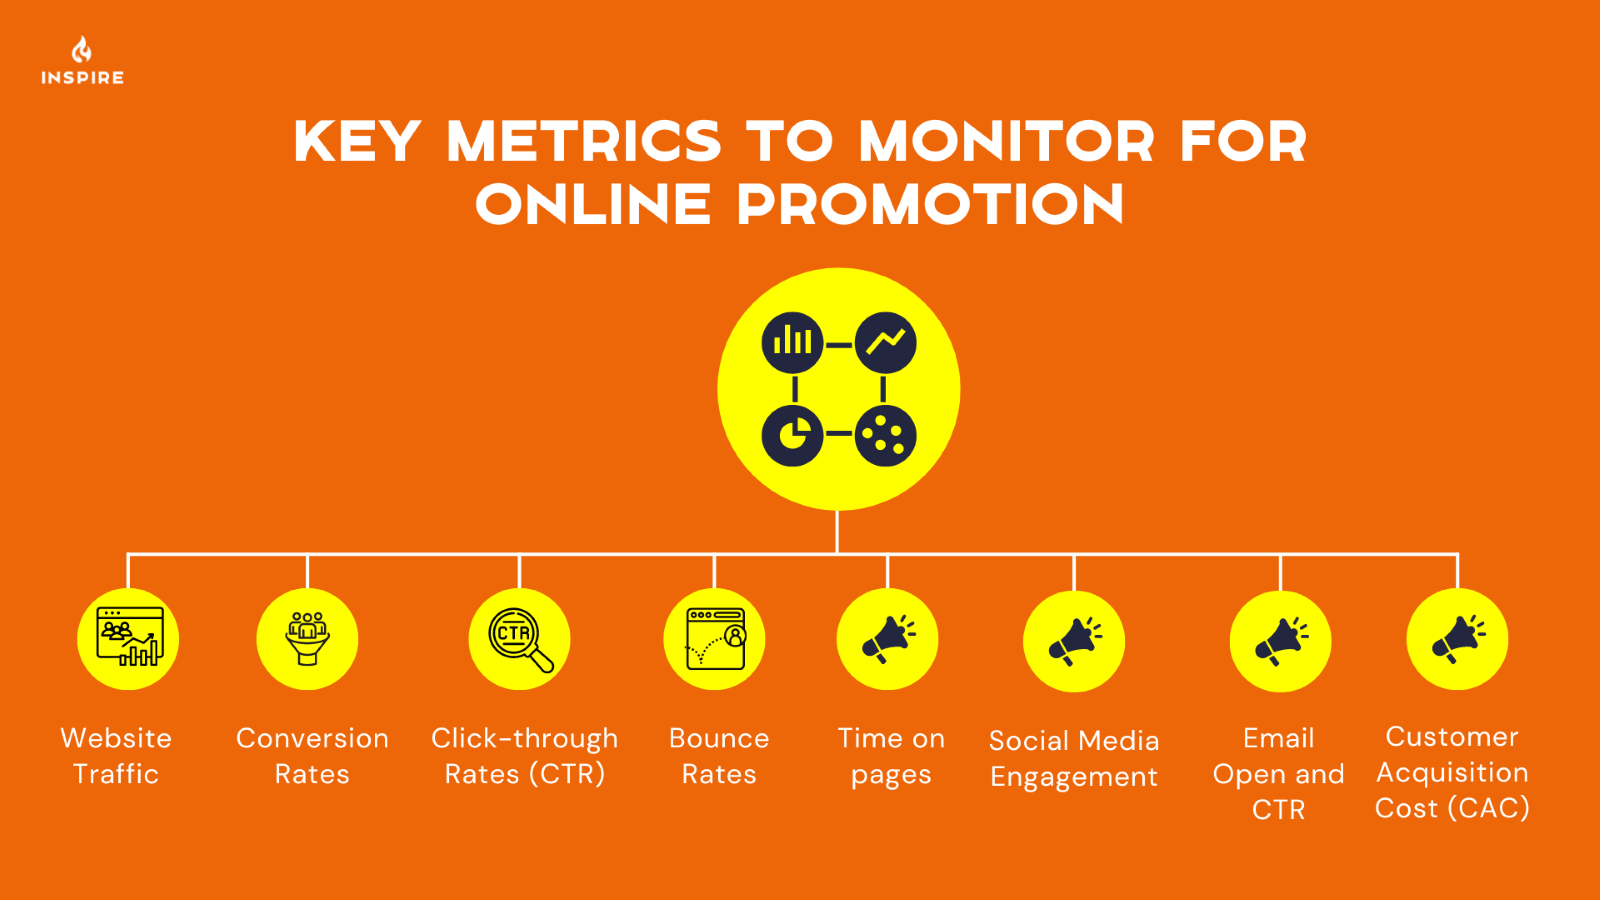 Key metrics to monitor for online promotion